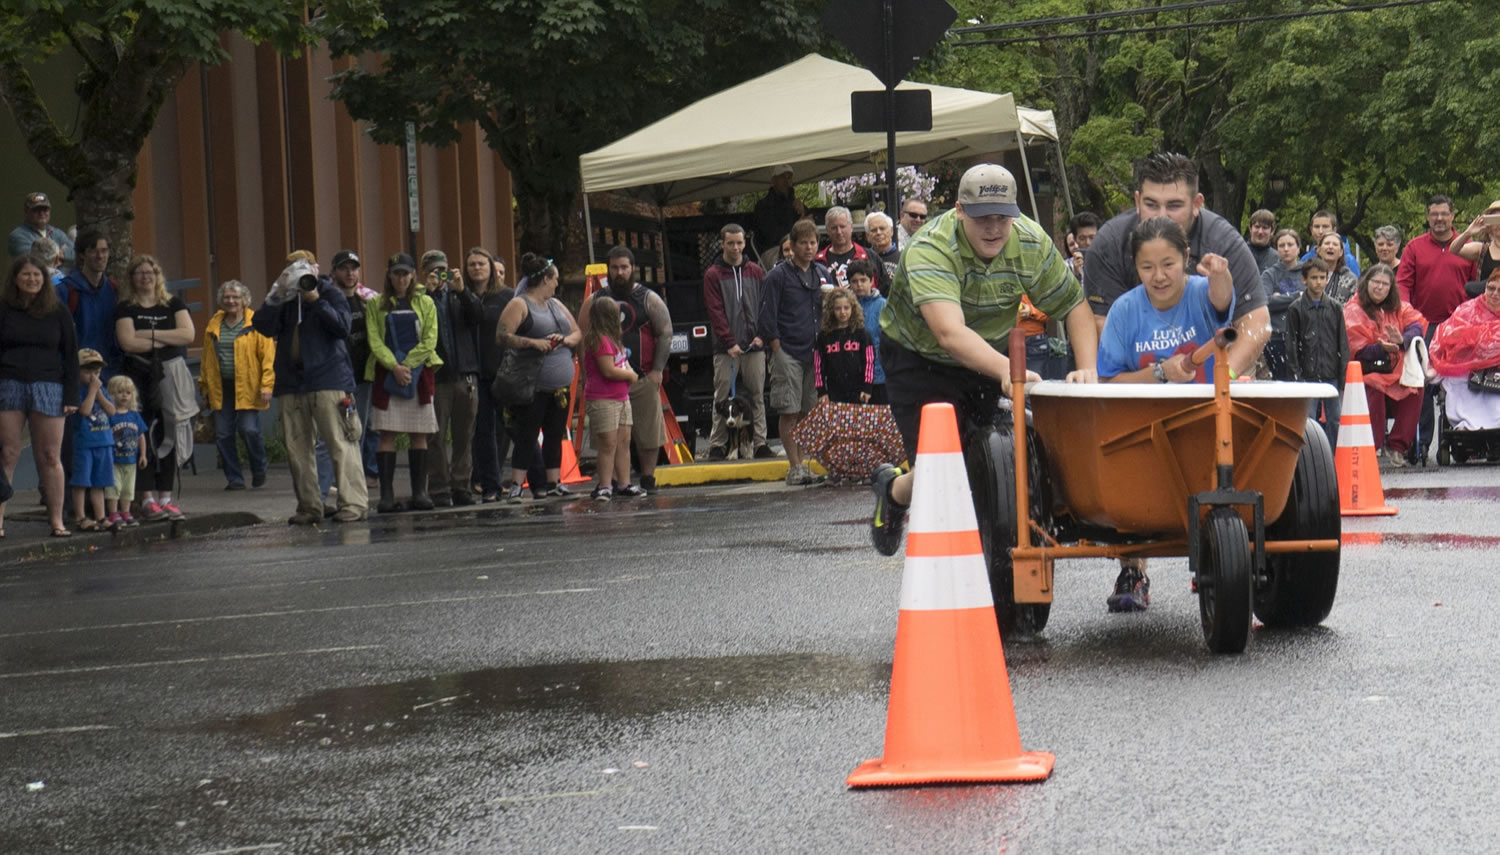 The team from Lutz Hardware had the best time in the championship round of bathtub races, giving them the first place award on Saturday.